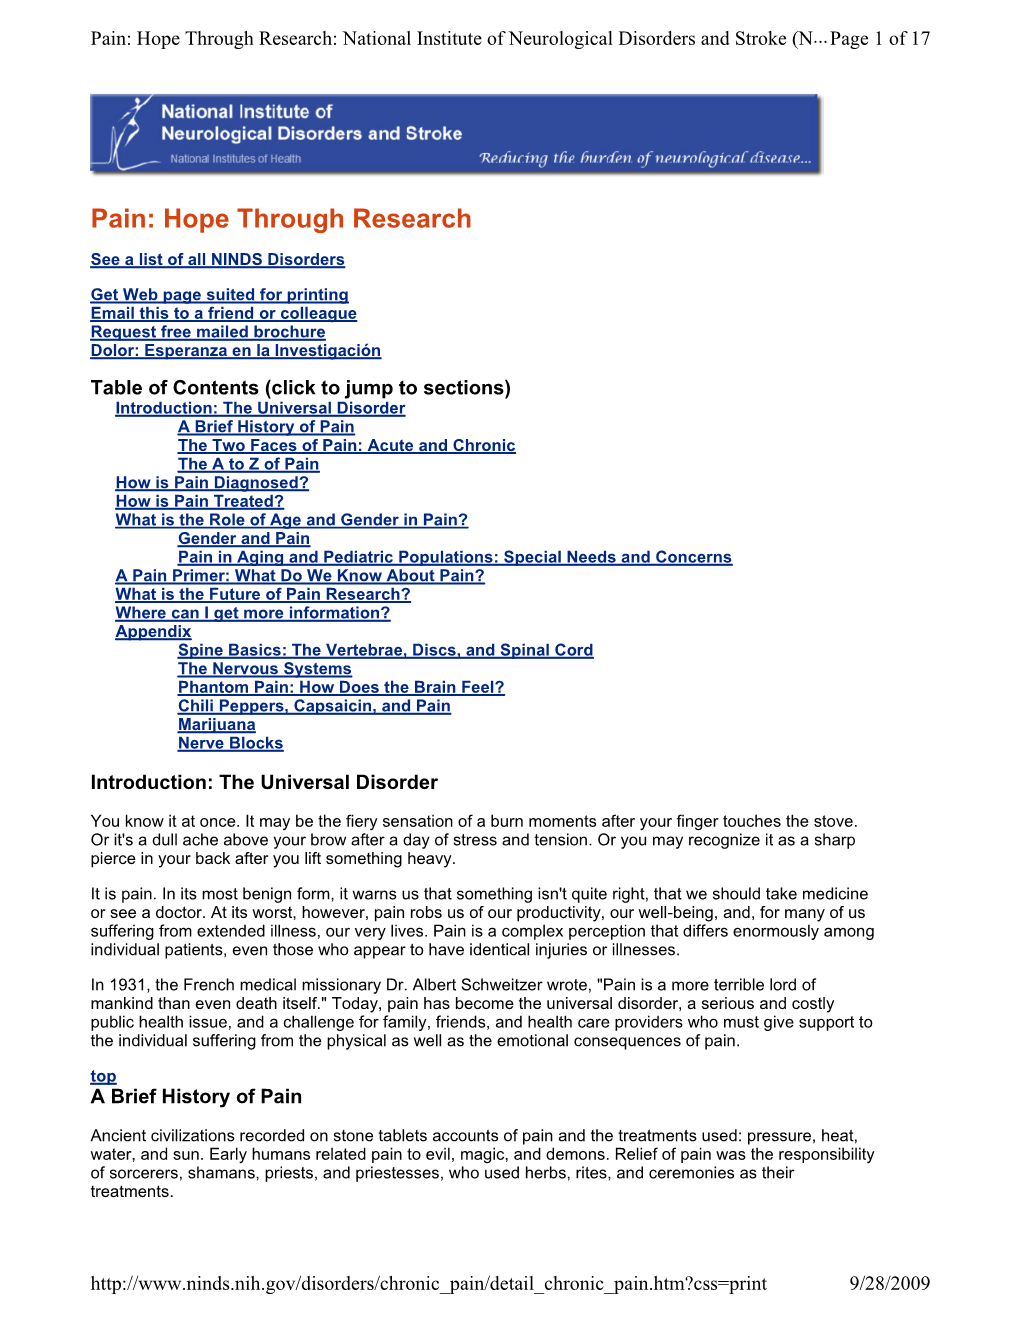 Hope Through Research: National Institute of Neurological Disorders and Stroke (N...Page 1 of 17